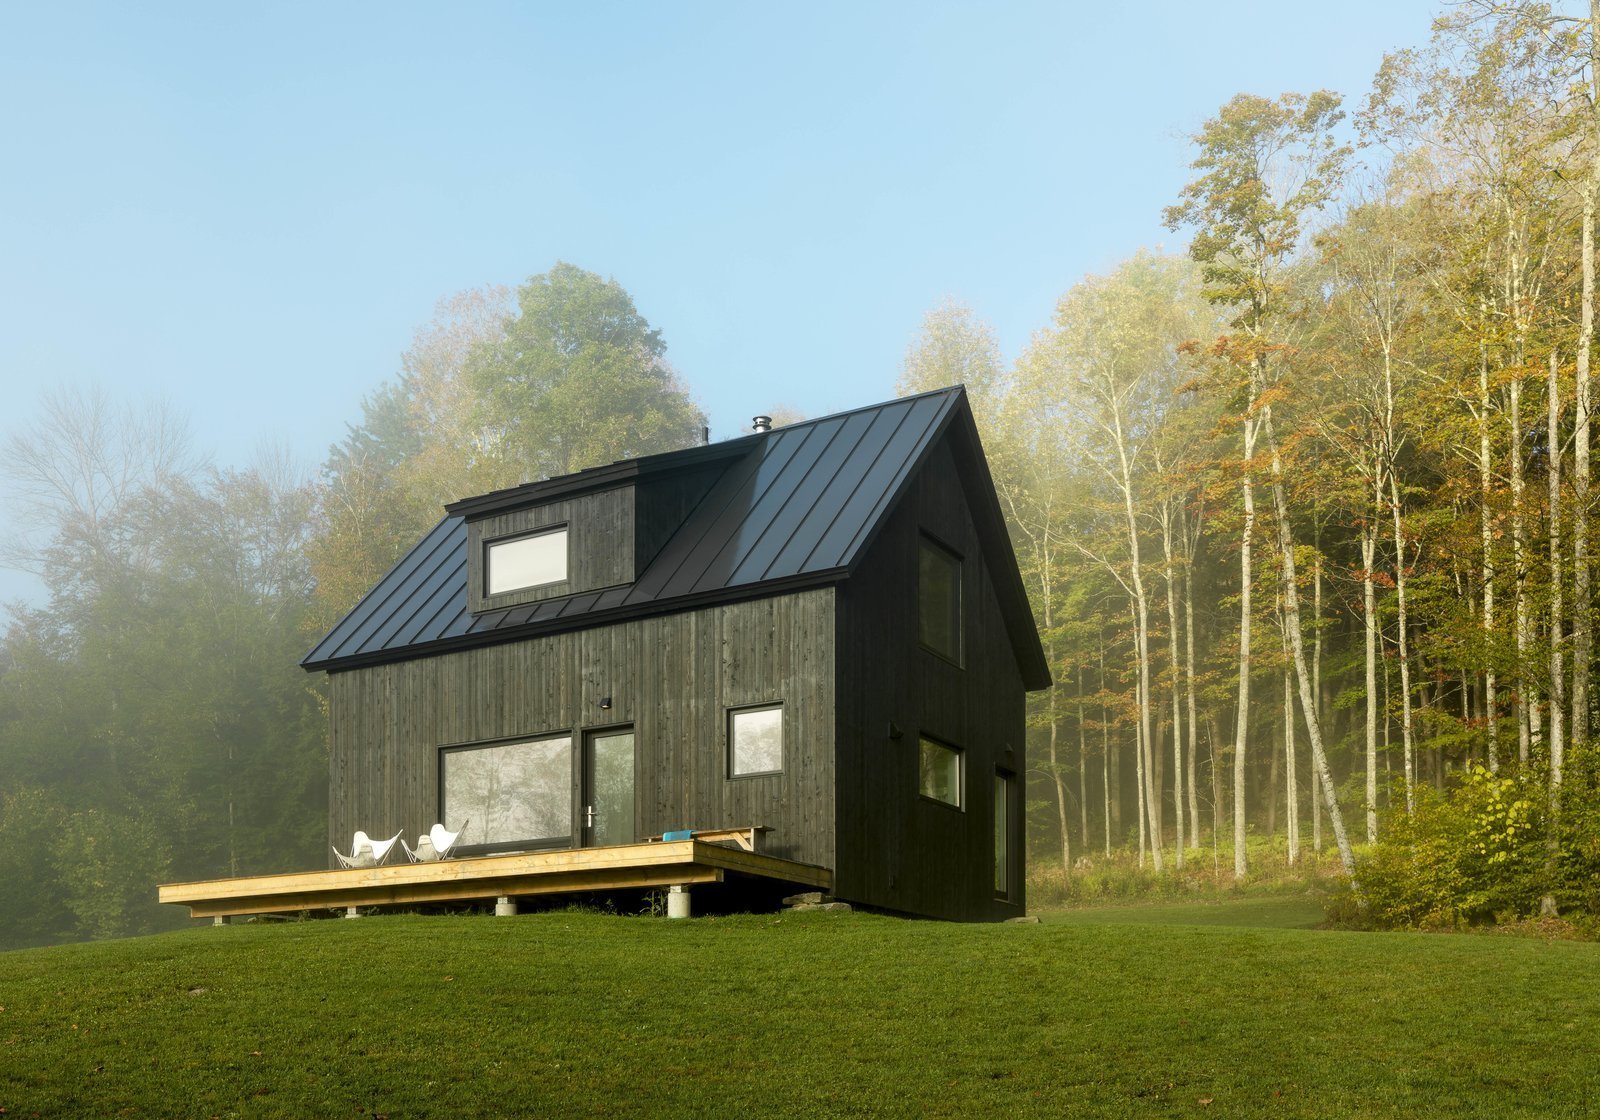 A Little Black Cabin Keeps Things Simple for a Family of Four in Vermont